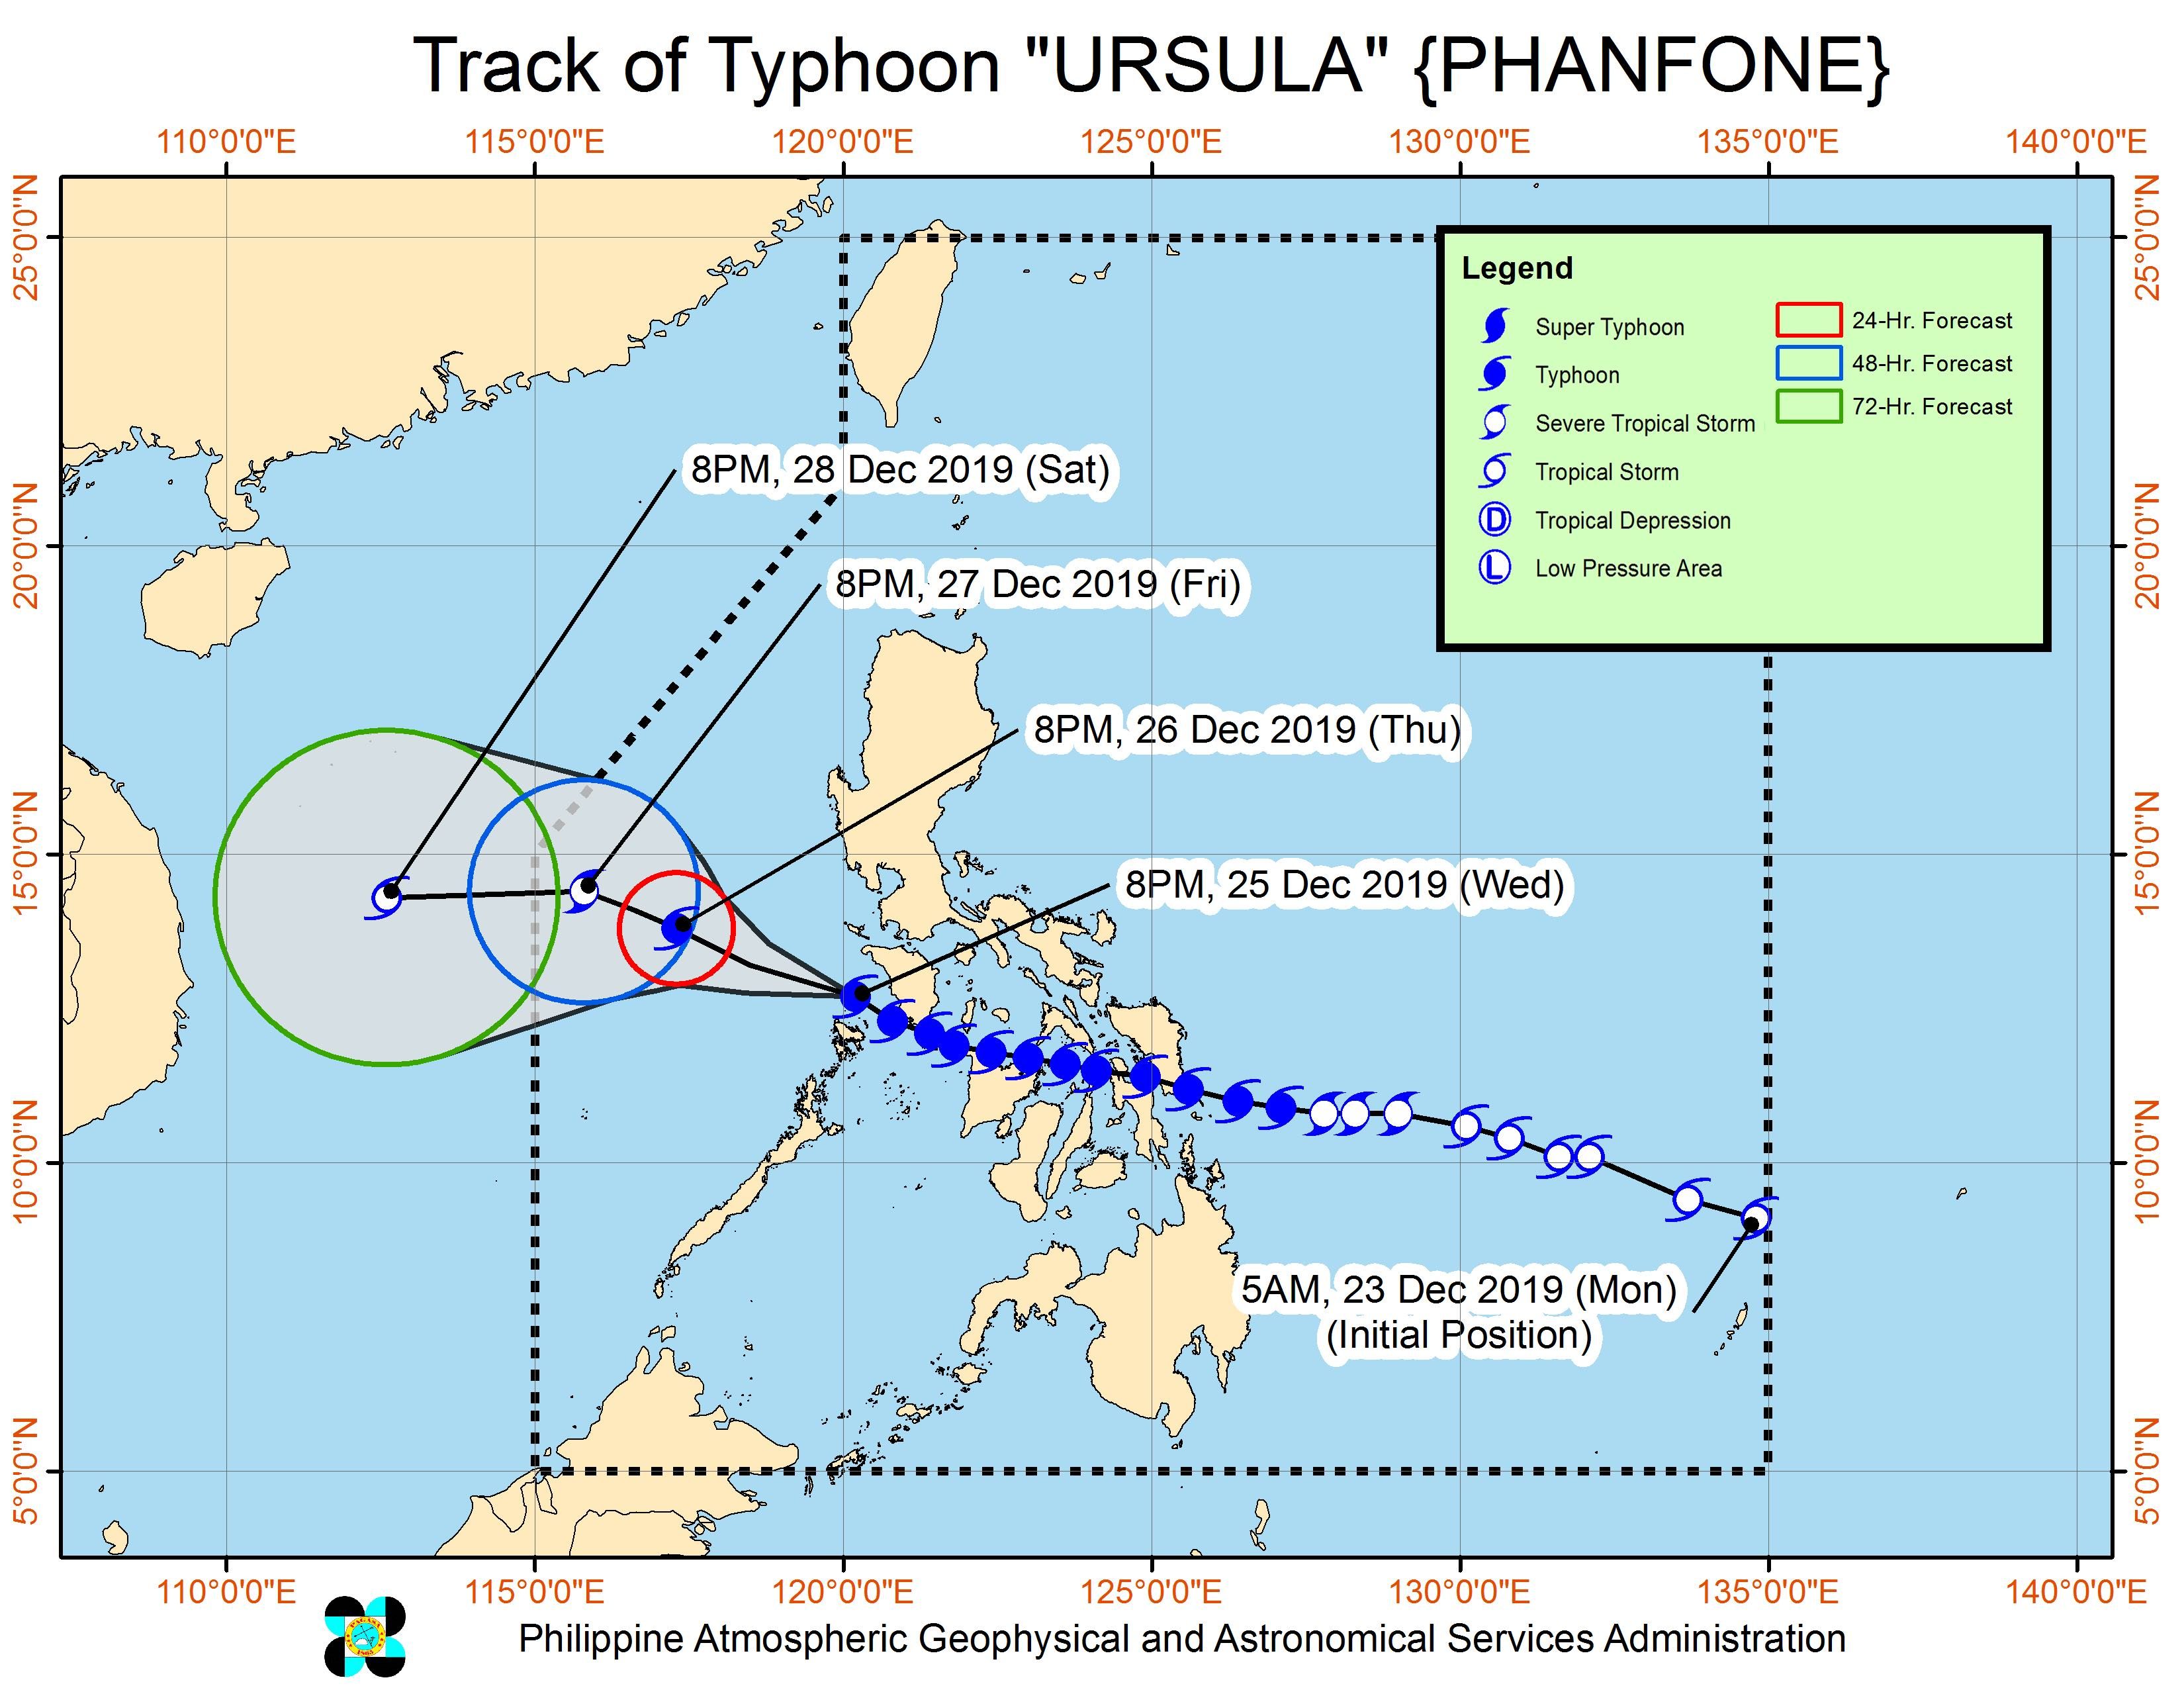 Forecast track of Typhoon Ursula (Phanfone) as of December 25, 2019, 11 pm. Image from PAGASA 